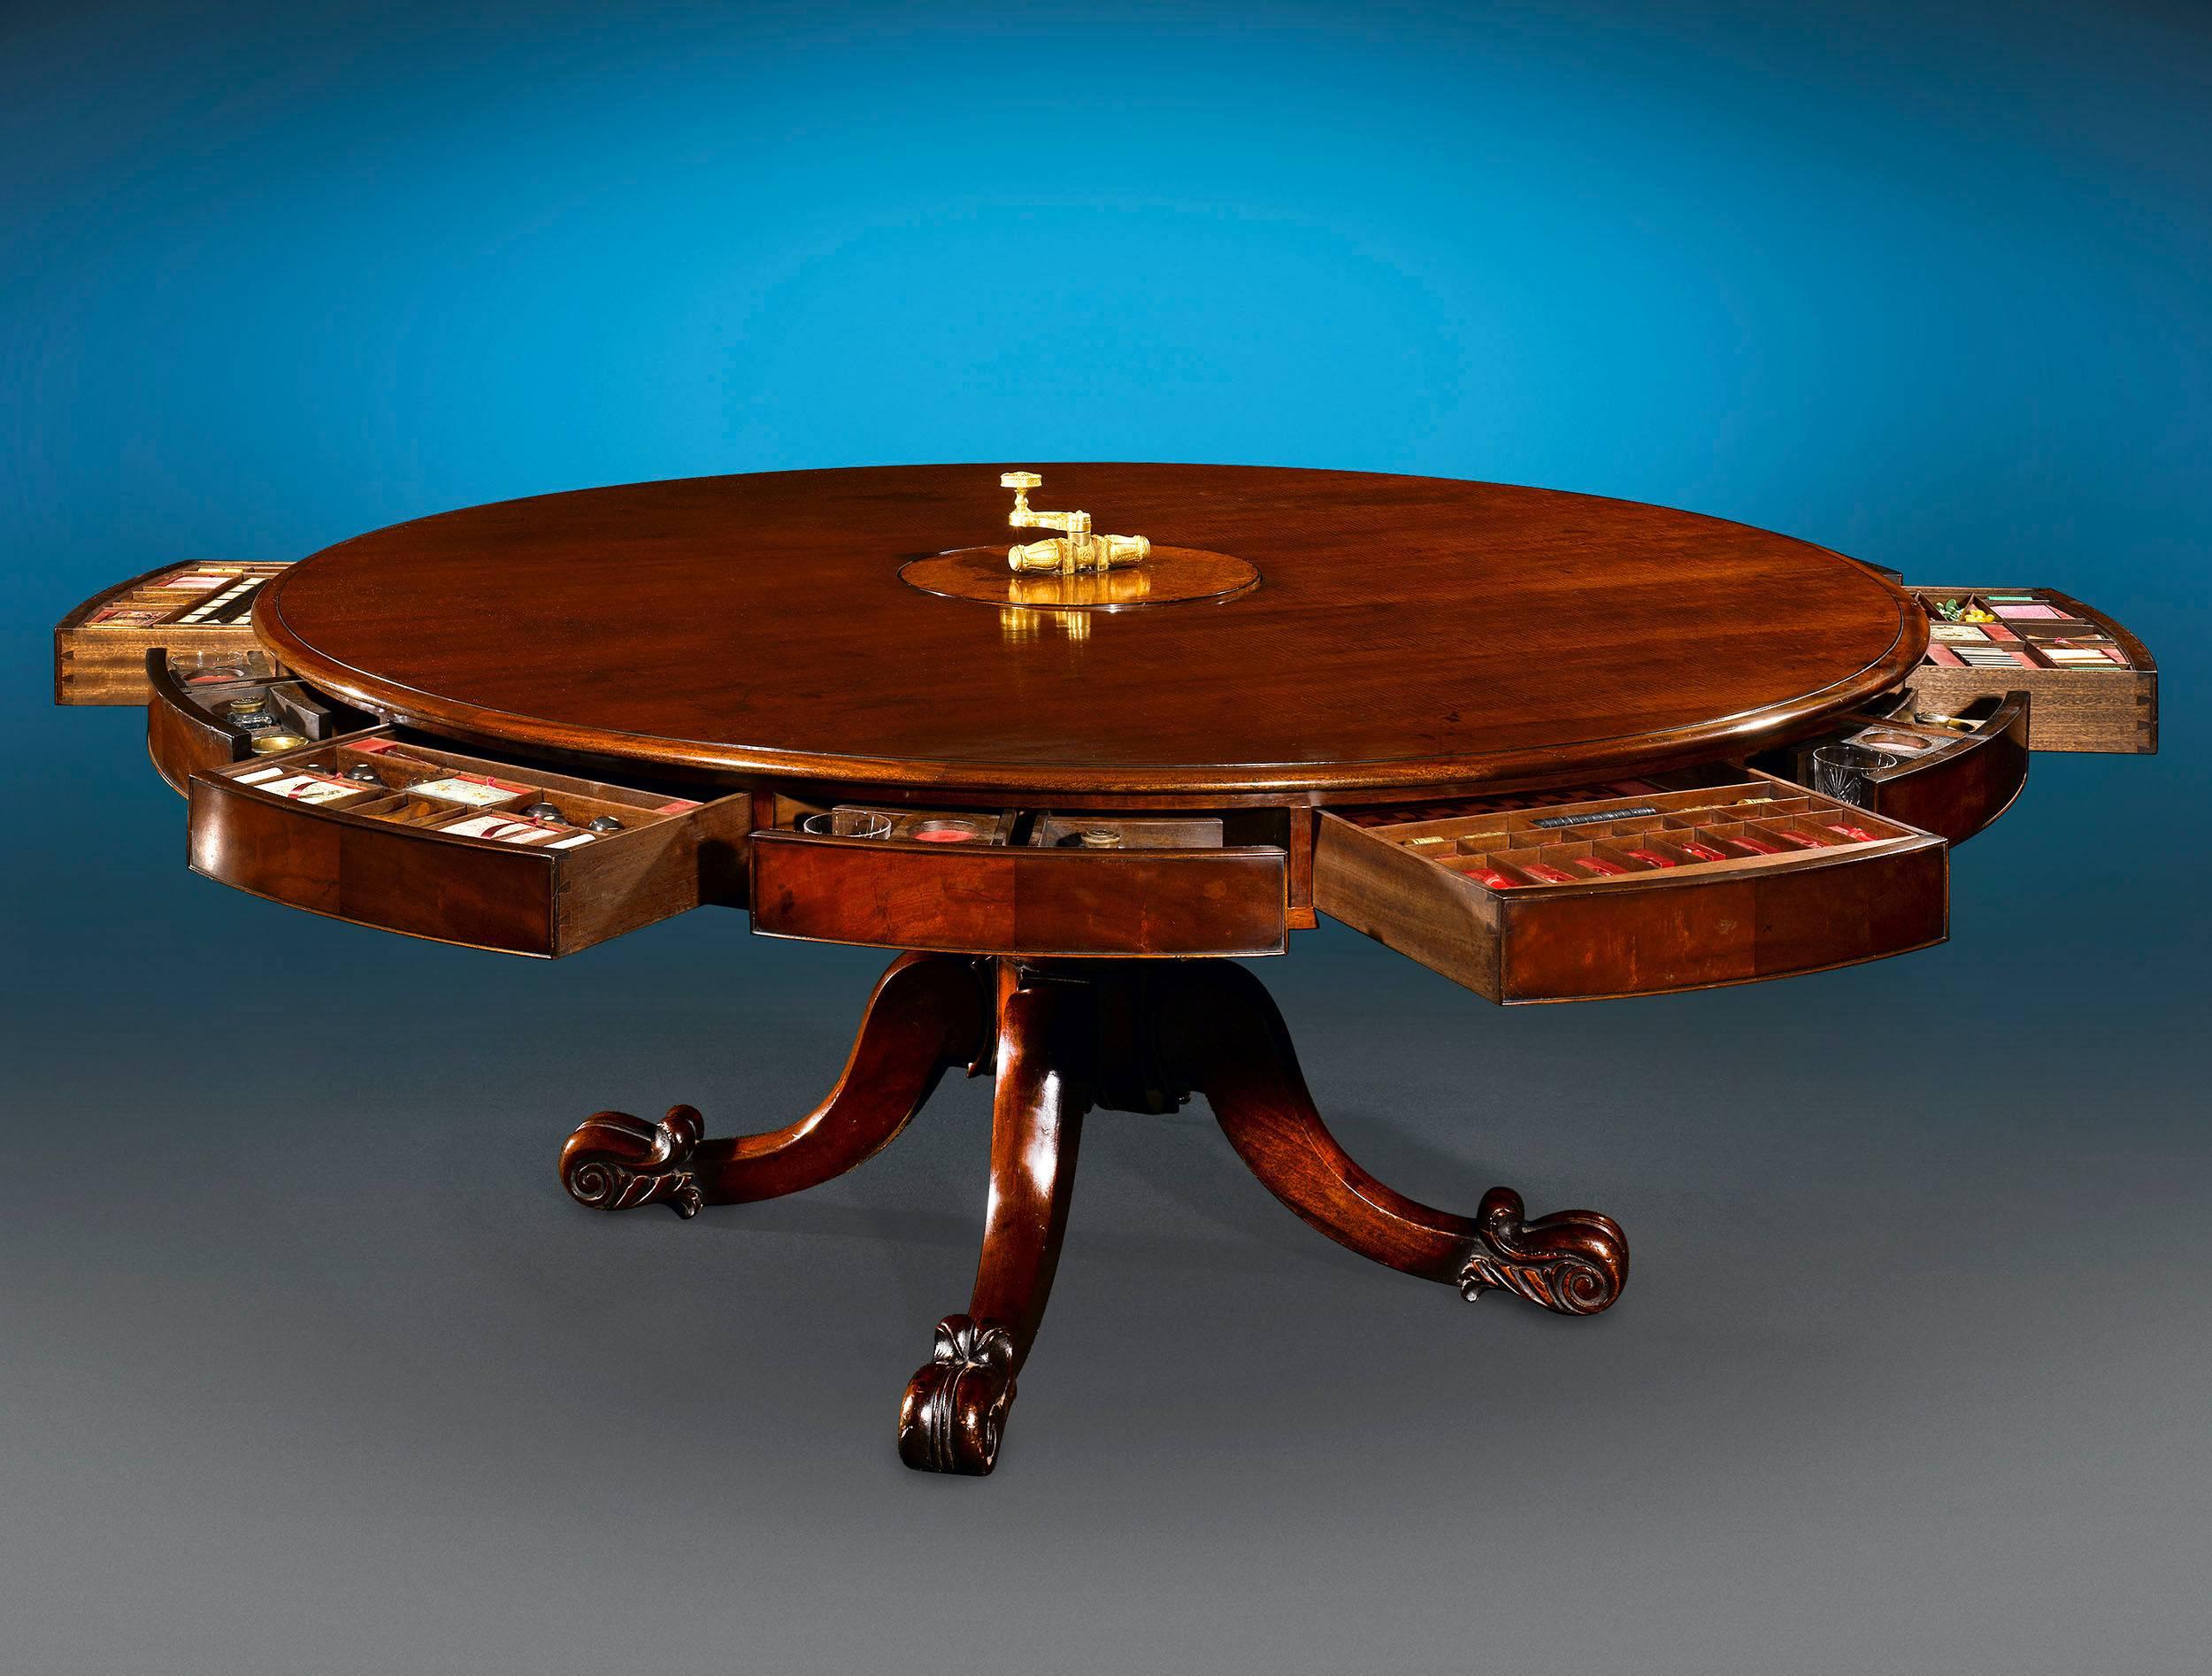 A work of extraordinary ingenuity and rarity, this Irish mechanical dining table transforms into a fully stocked games table with just a few turns. Crafted of impeccable Cuban mahogany, the table exhibits a striking patina and a beautifully sculpted